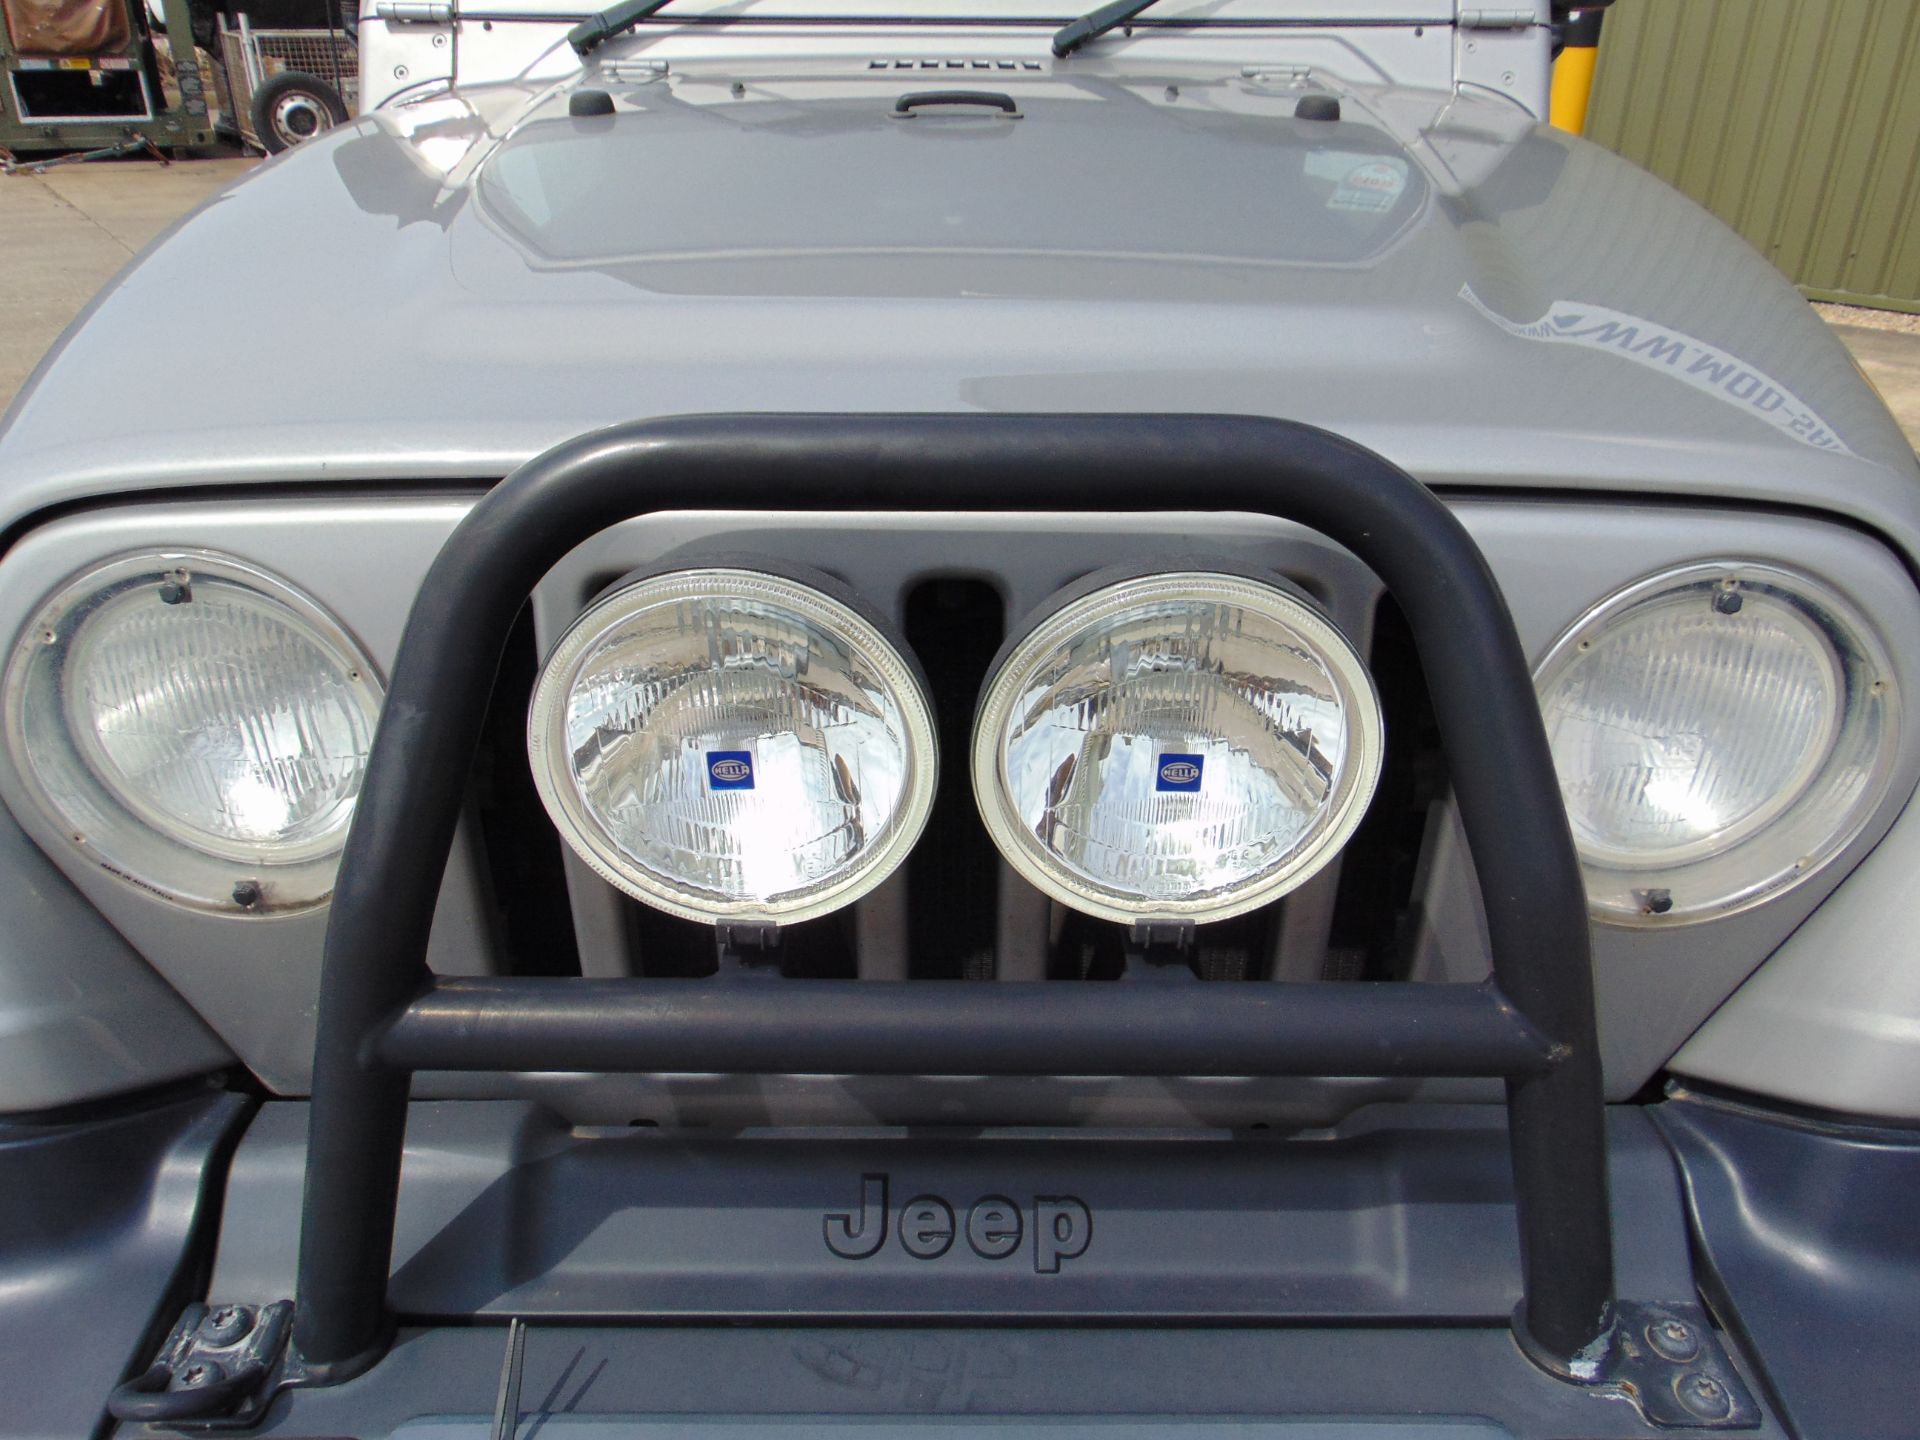 Stunning 2001 Jeep Wrangler 60TH Anniversary 4.0L Great 4X4 Iconic Classic ONLY 17,613 Miles! - Image 12 of 23